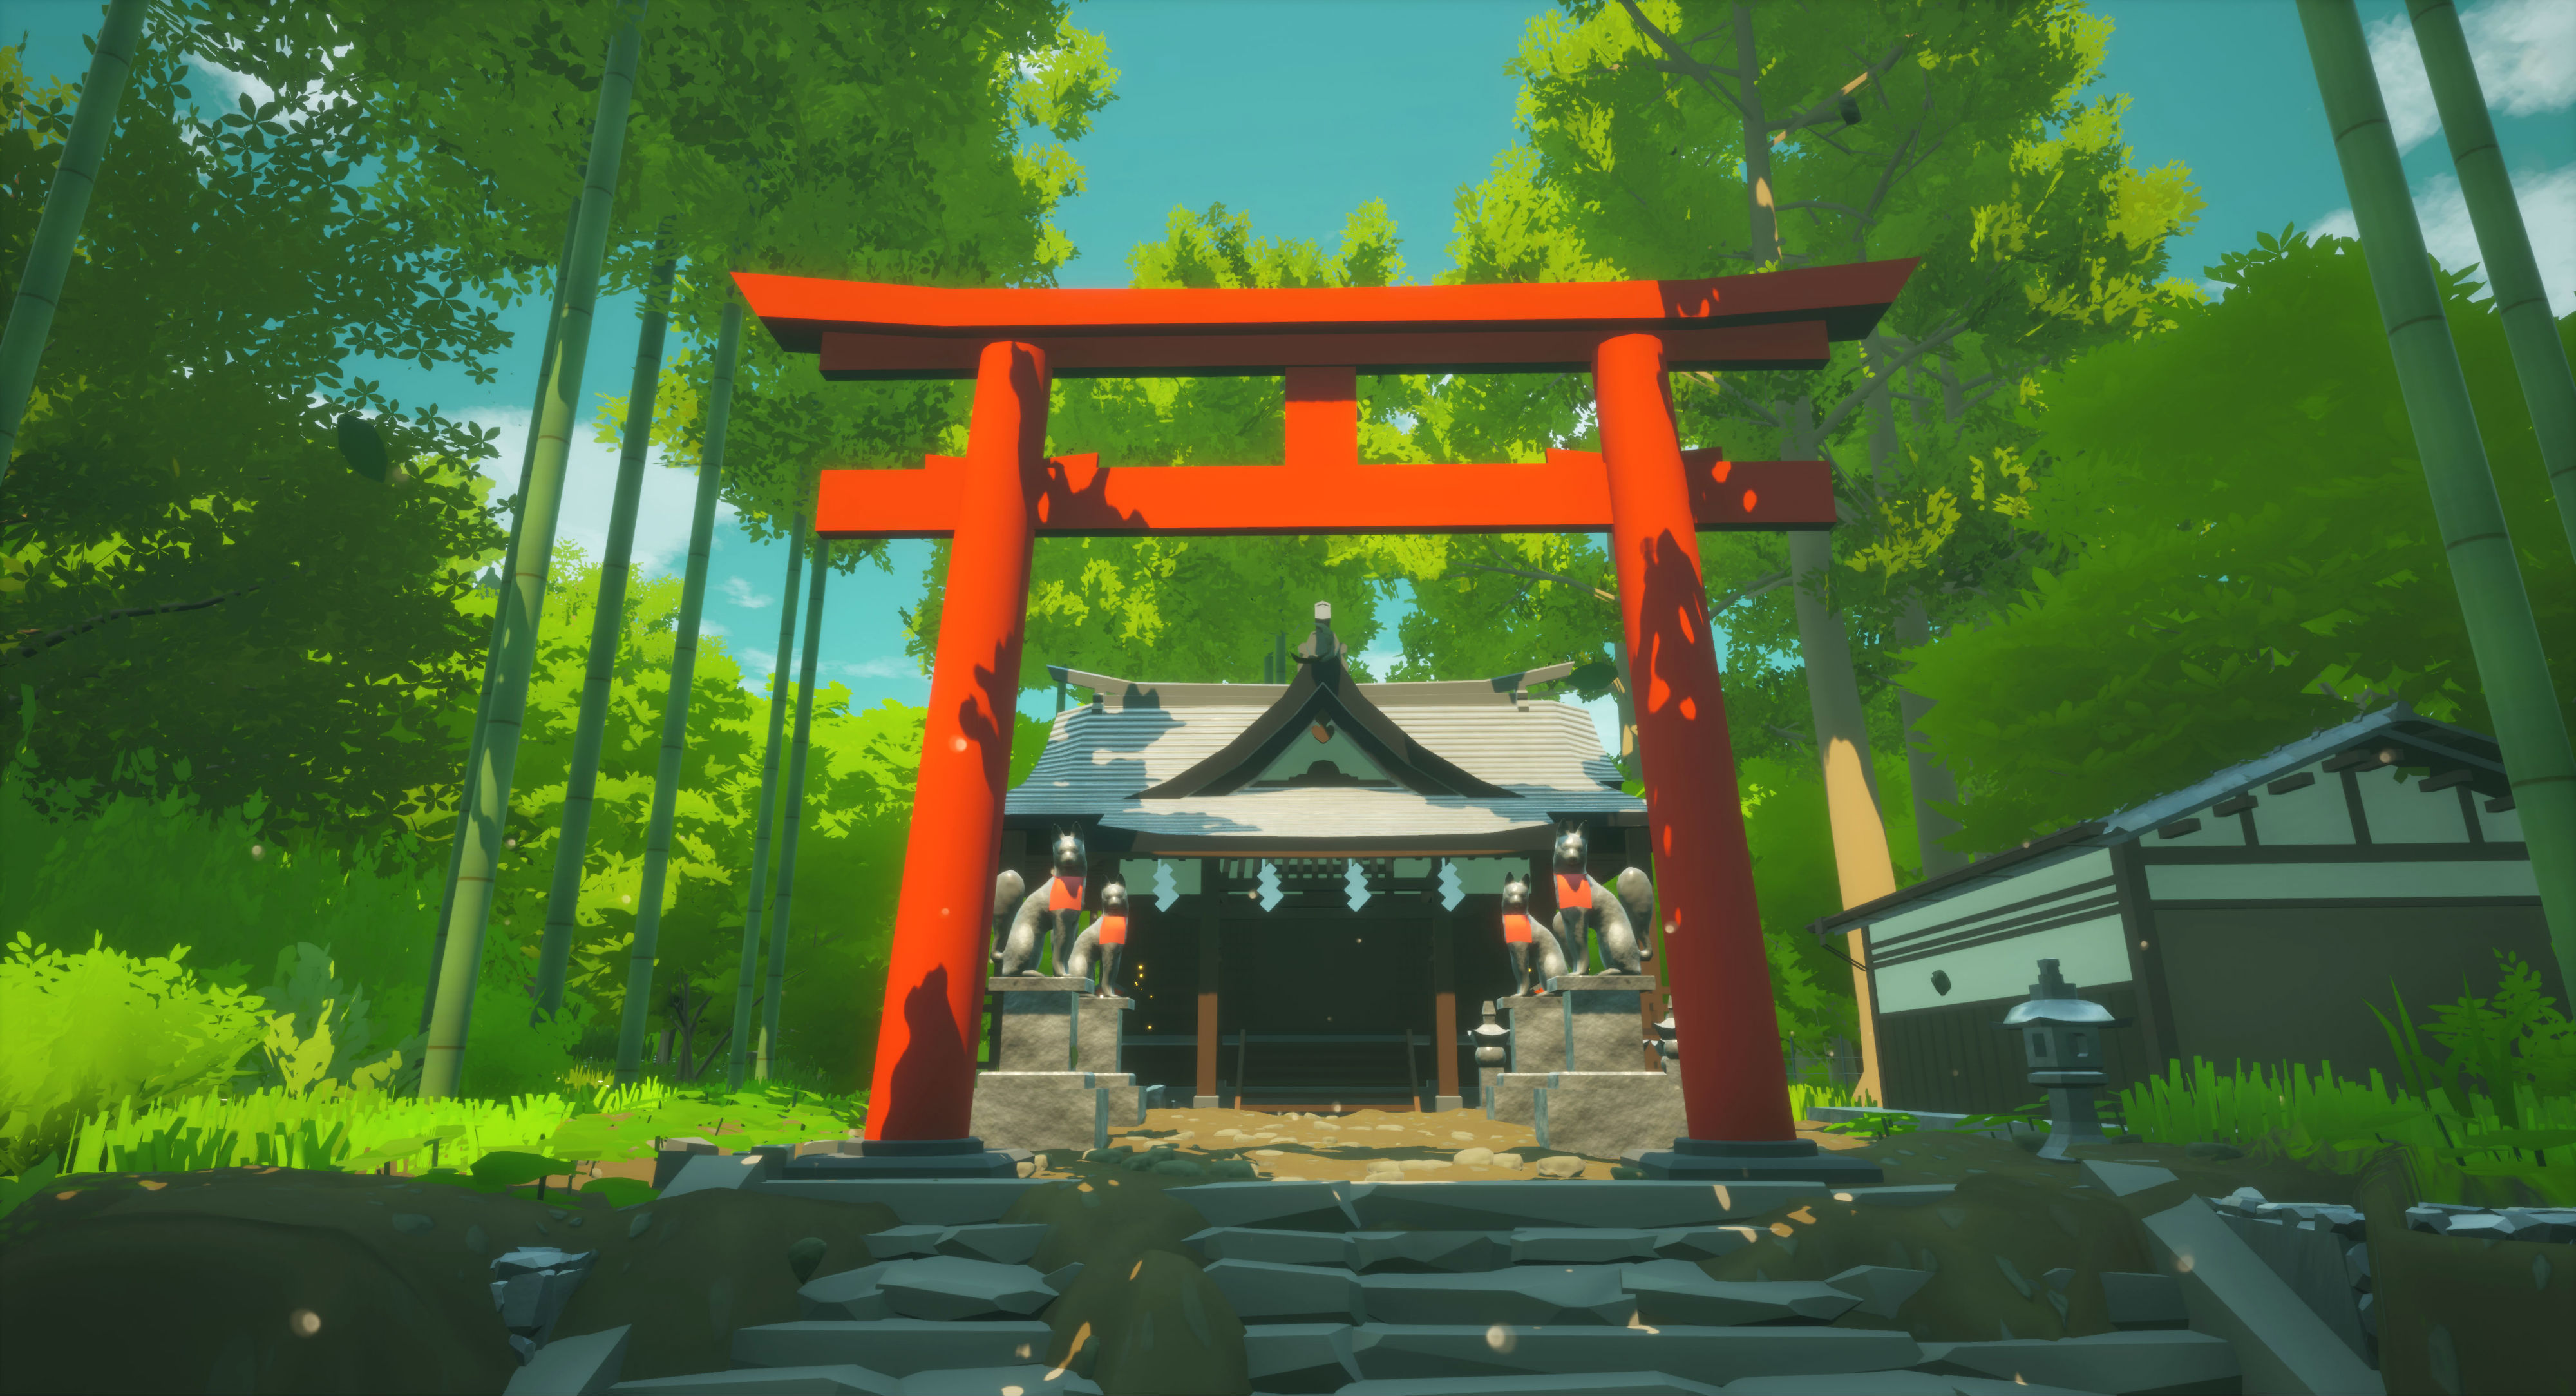 Making it in Unreal: explore the Ghibli-like ambiance of rural Japan in the Inaka Project